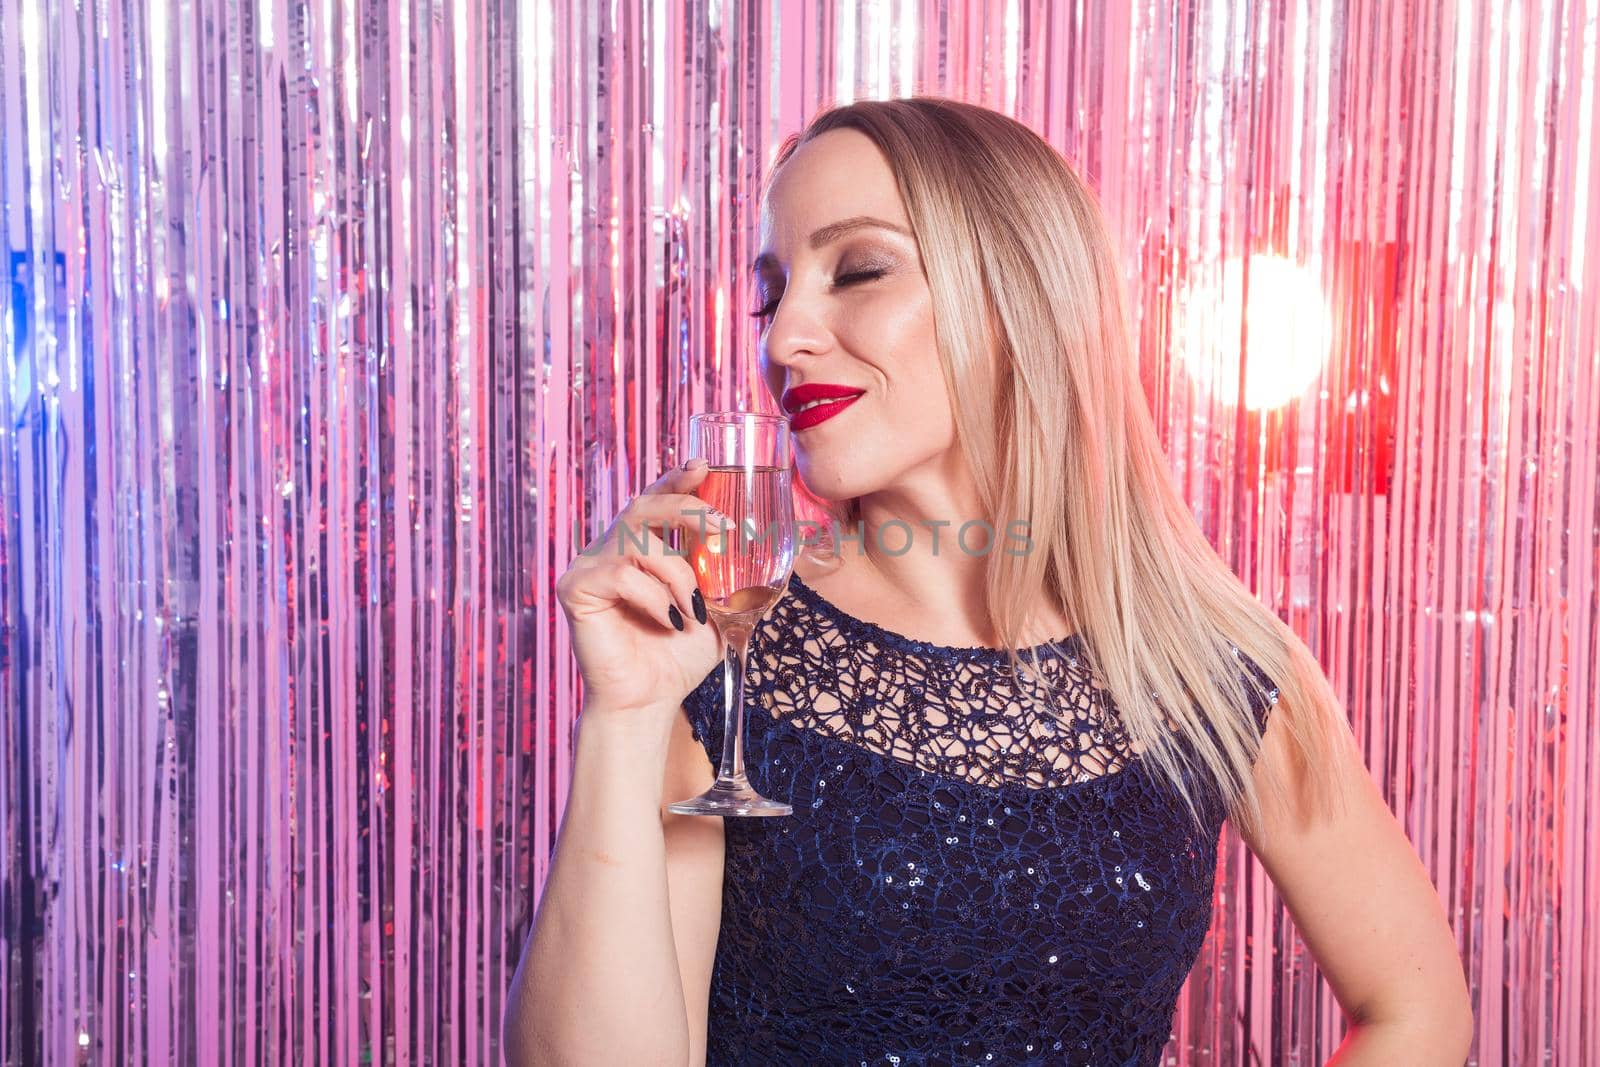 Party, drinks, holidays and celebration concept - smiling woman in evening dress with glass of sparkling wine over shiny background. by Satura86